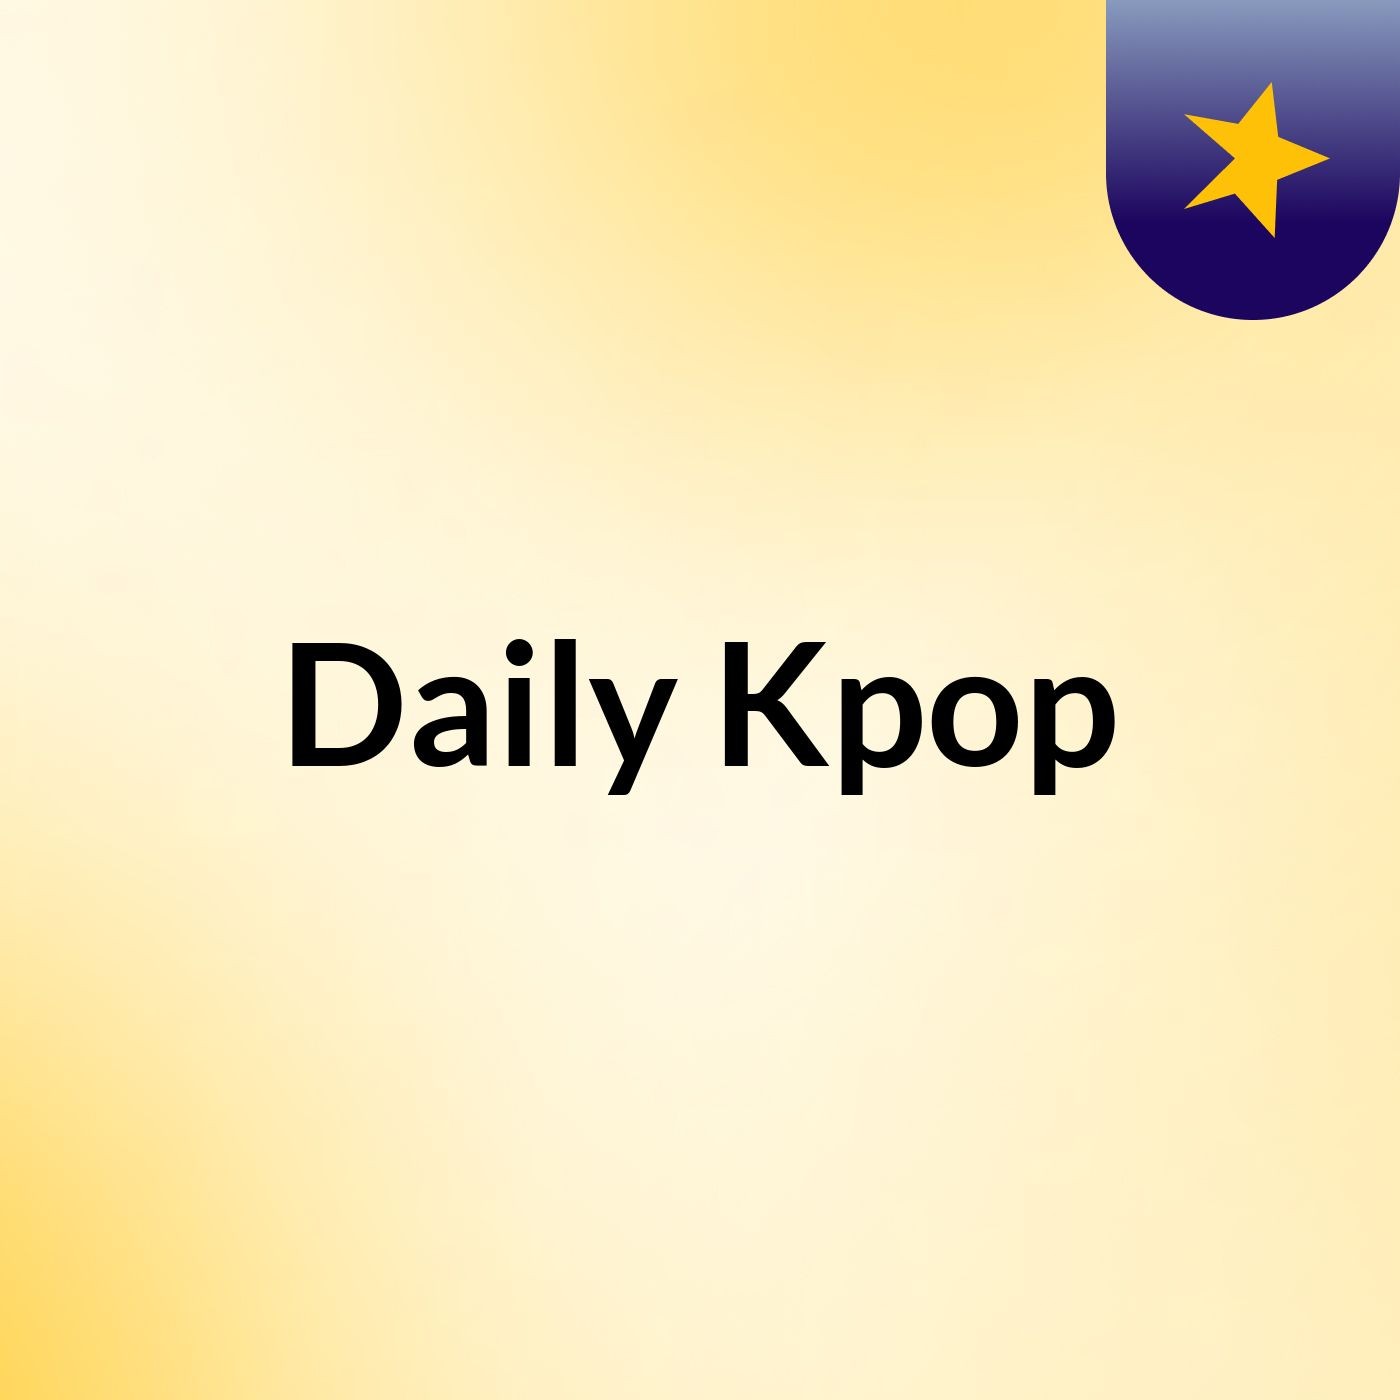 Episode 2 - Daily Kpop